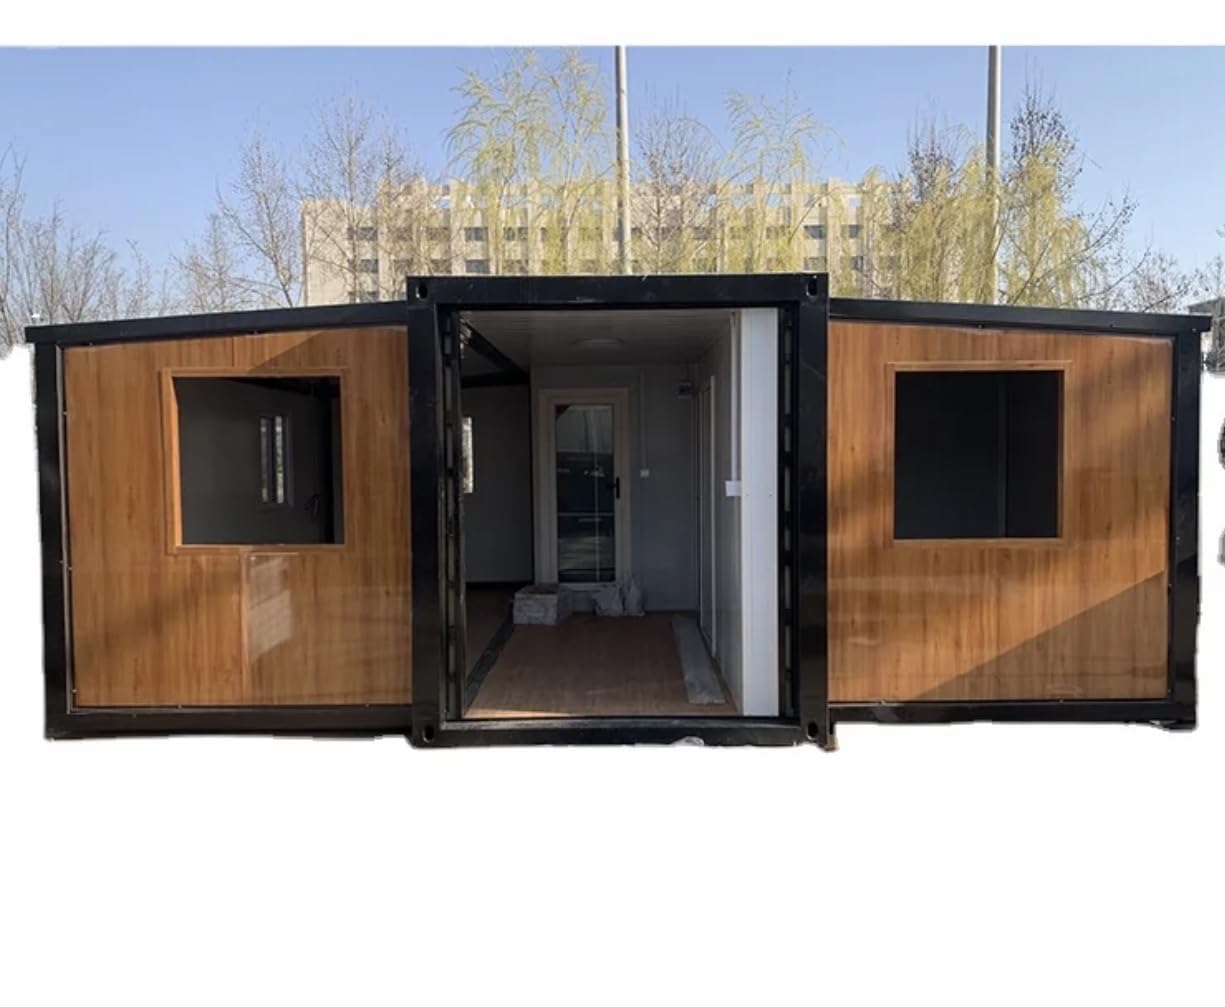 20 ft Prefabricated Home Office Building Kit, Standard Pre-Engineered Design, Floor Plans and Specs Included